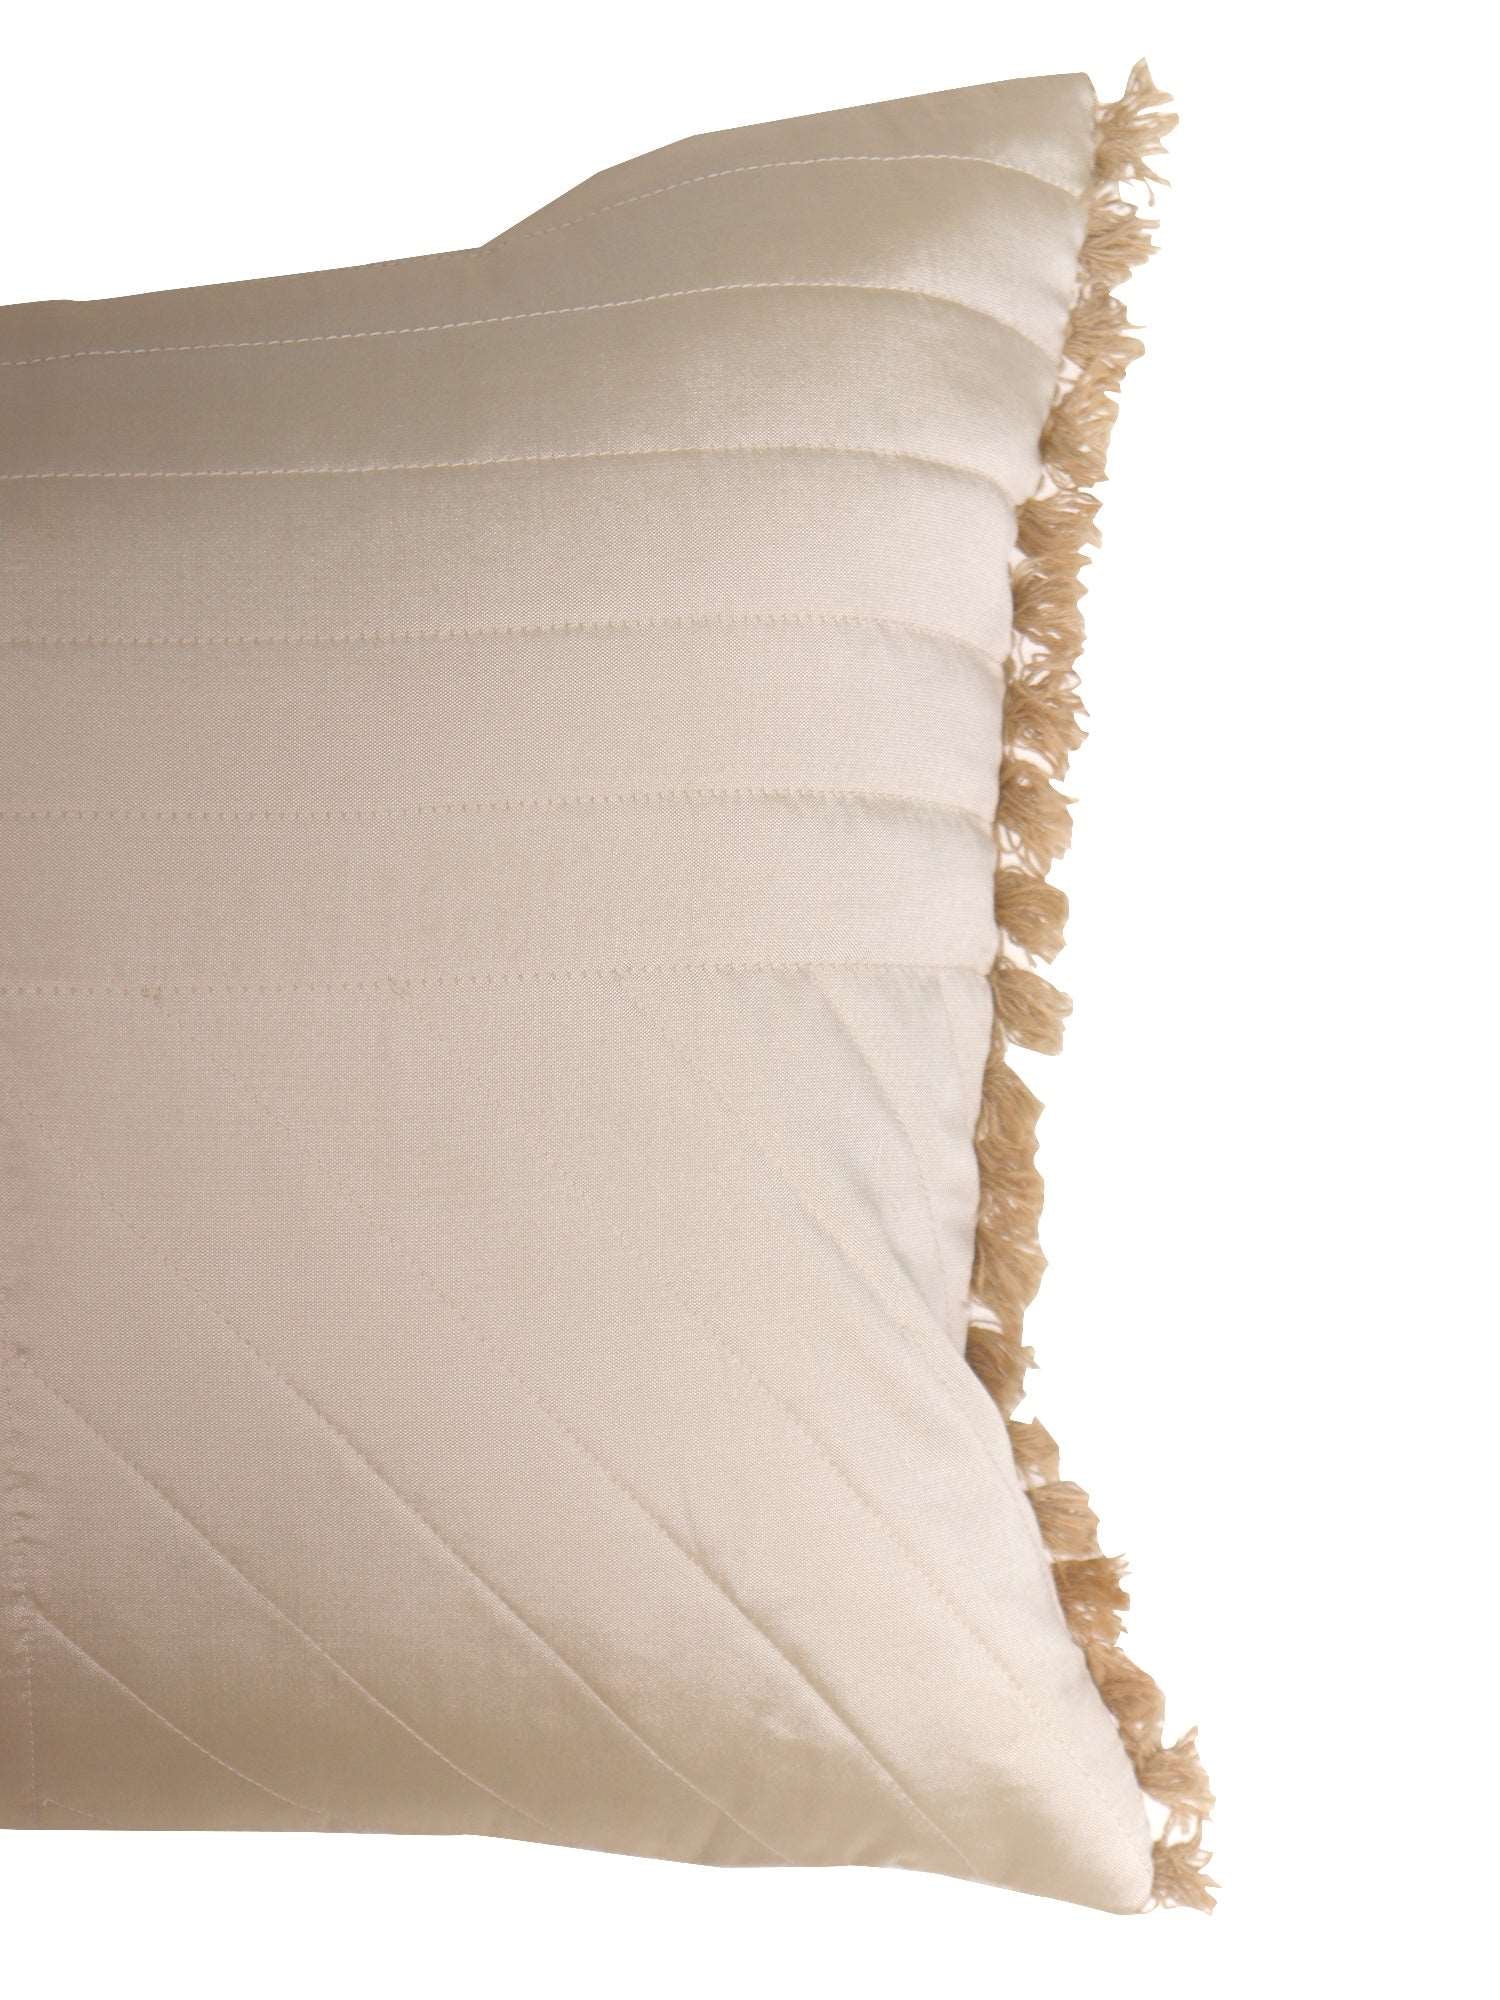 Cushion Cover Polyester Blend Quilted with Tassels Off White - 12"x 22"